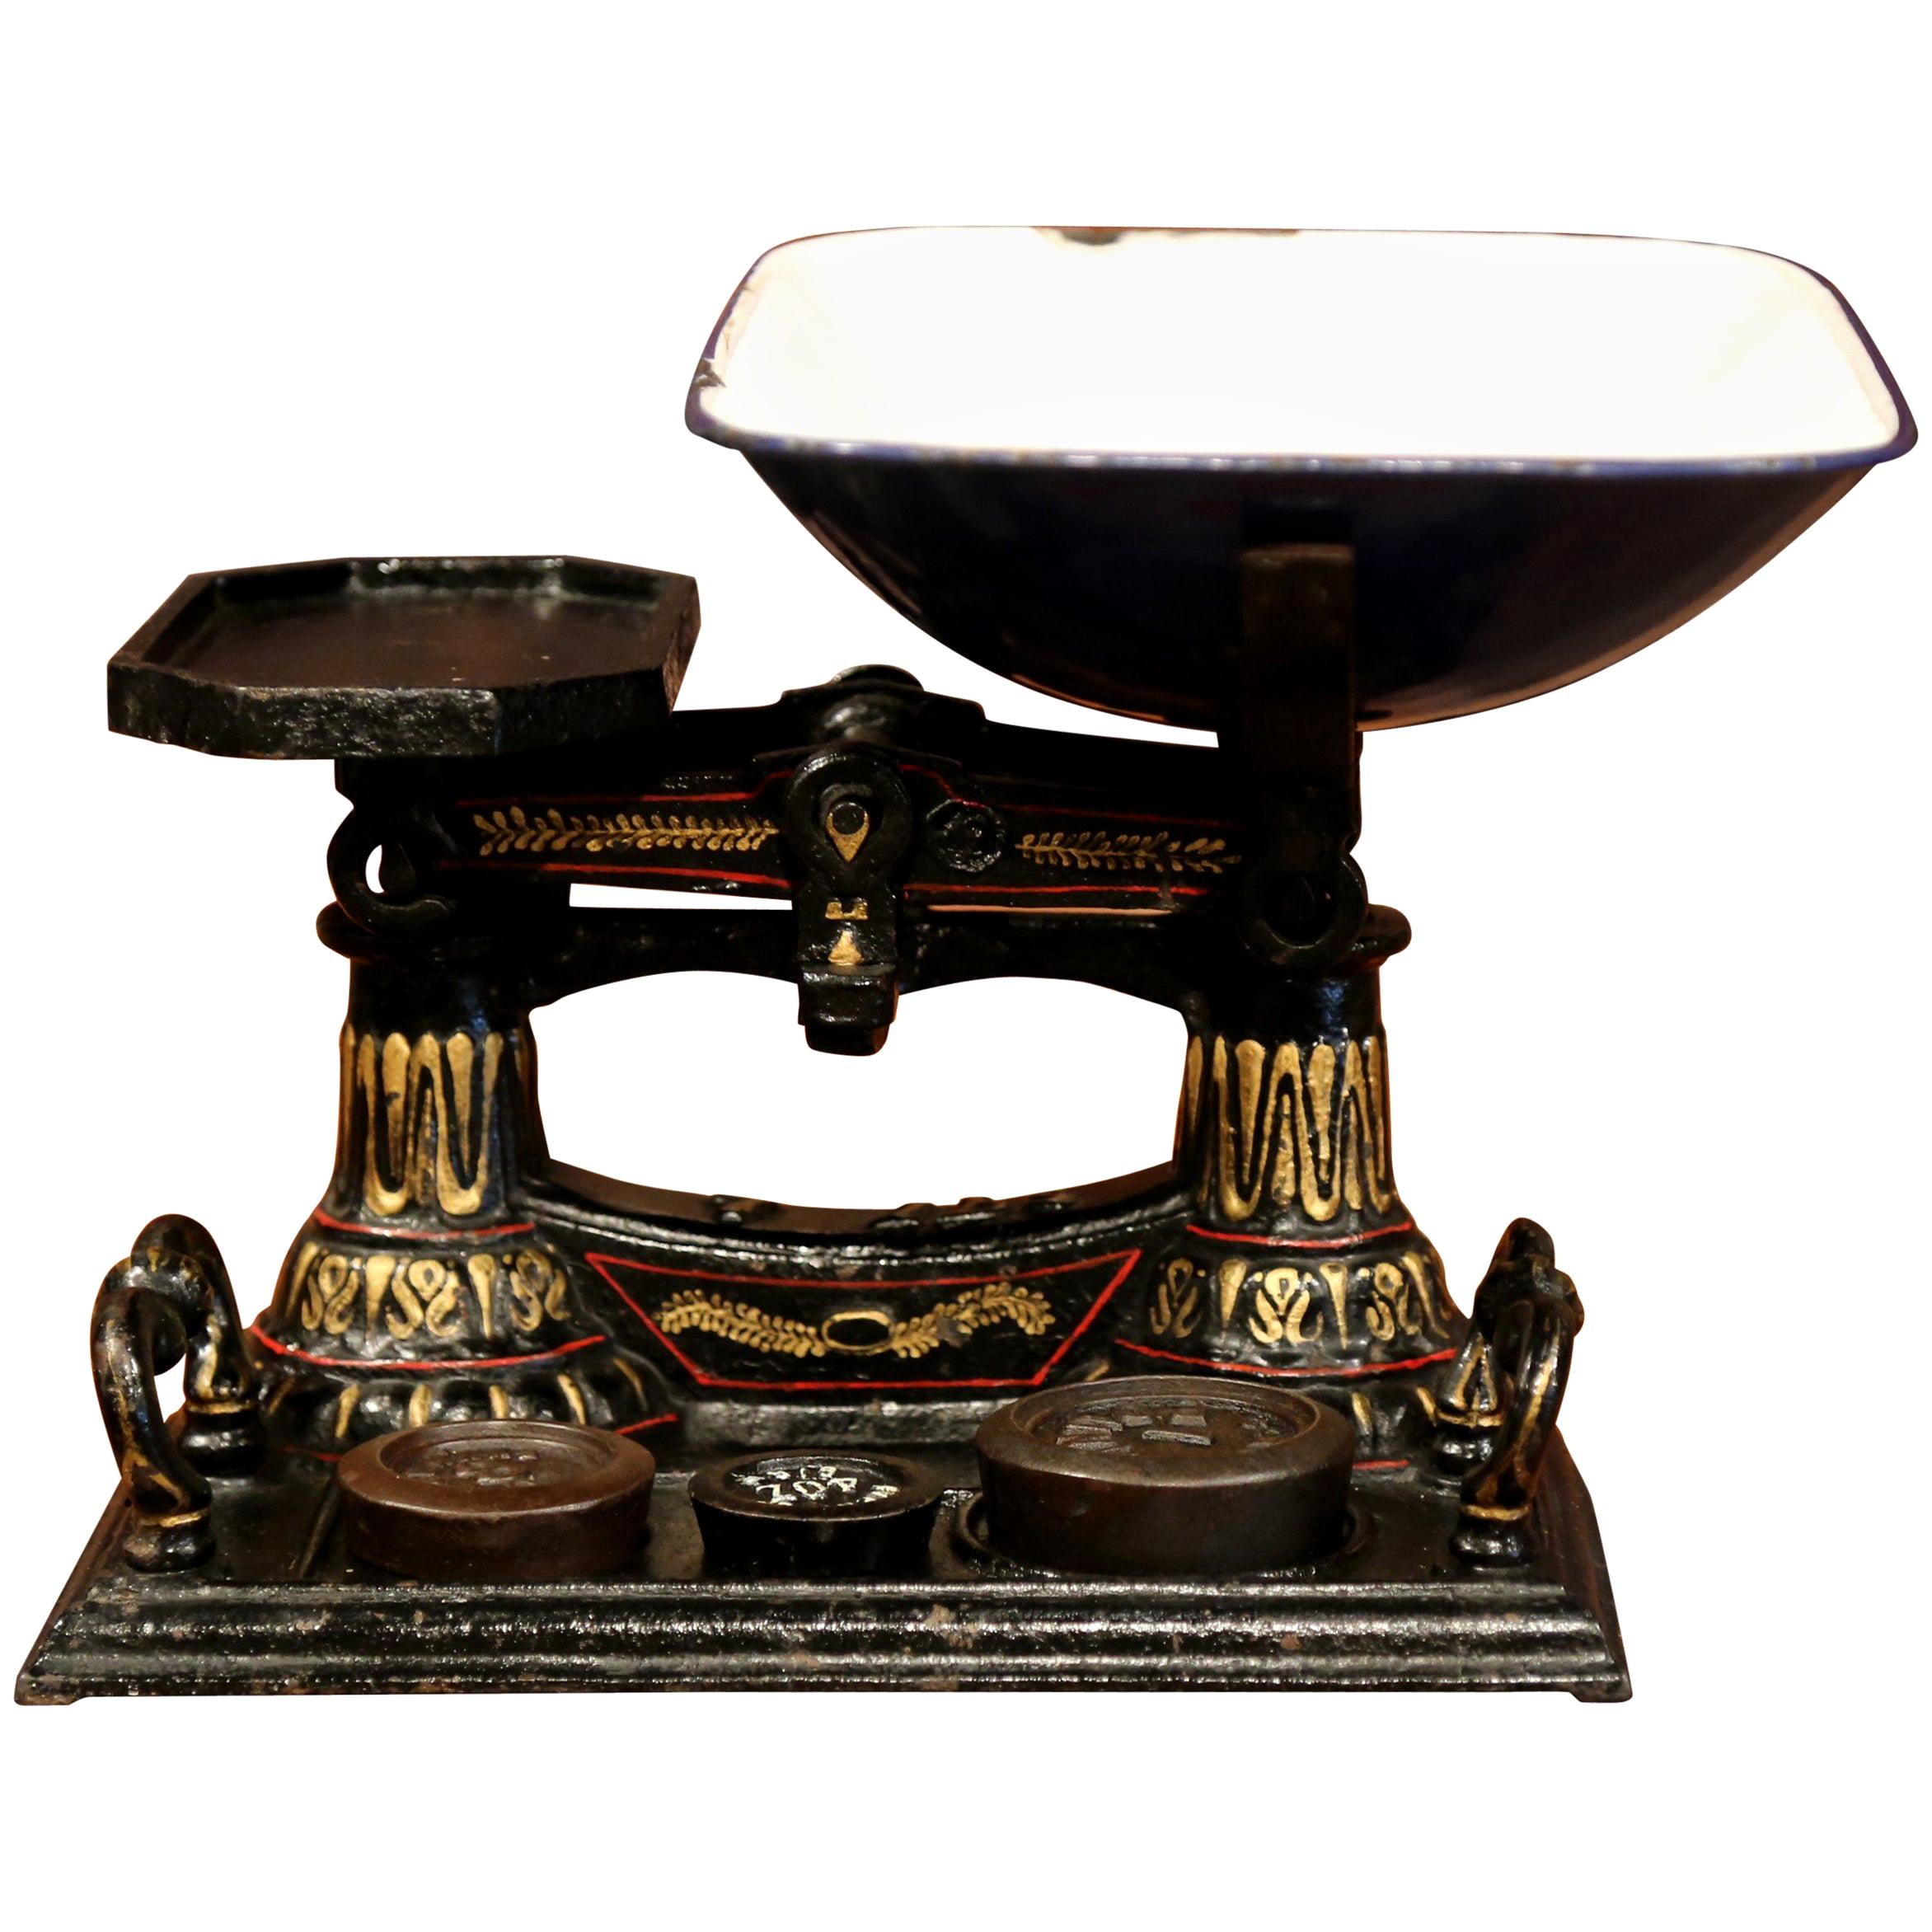 19th Century English Painted Iron Scale with Three Weights